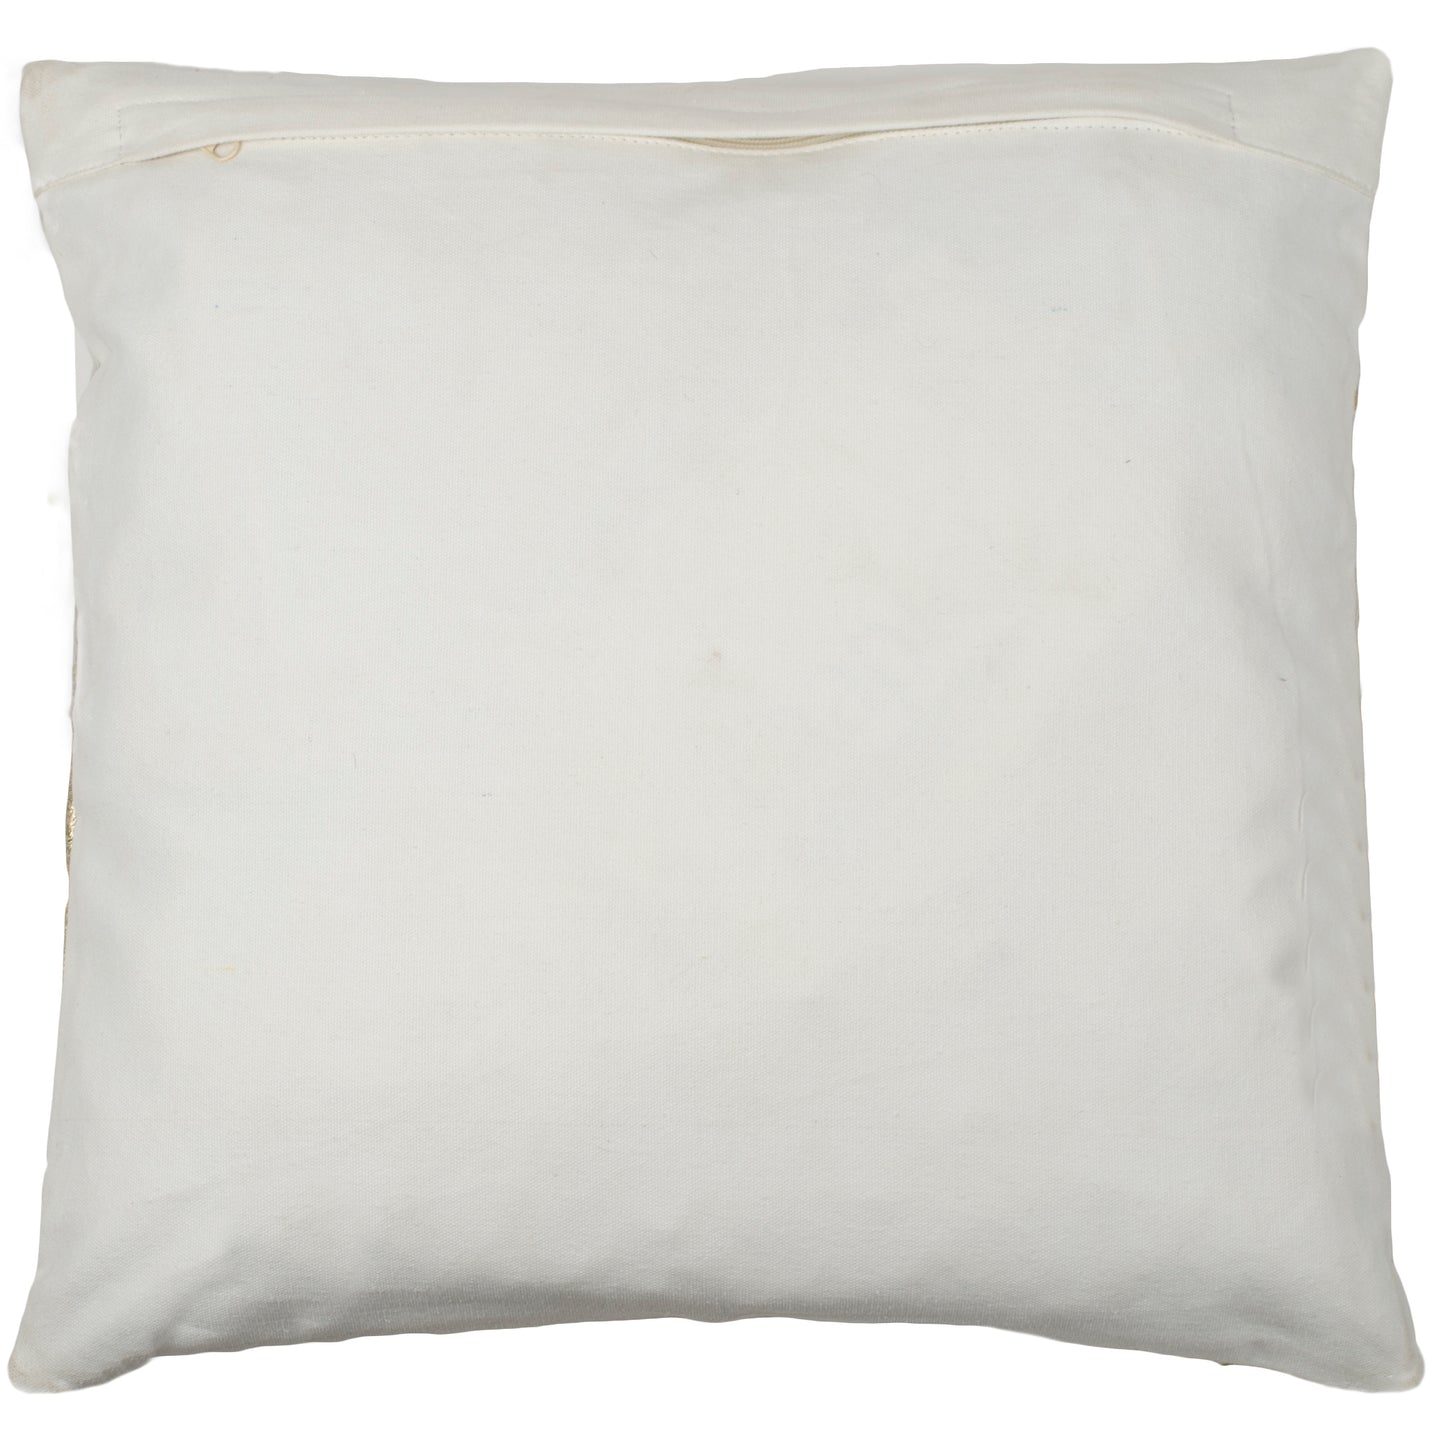 SWHF Leather Cushion Cover: White with Silver Foil